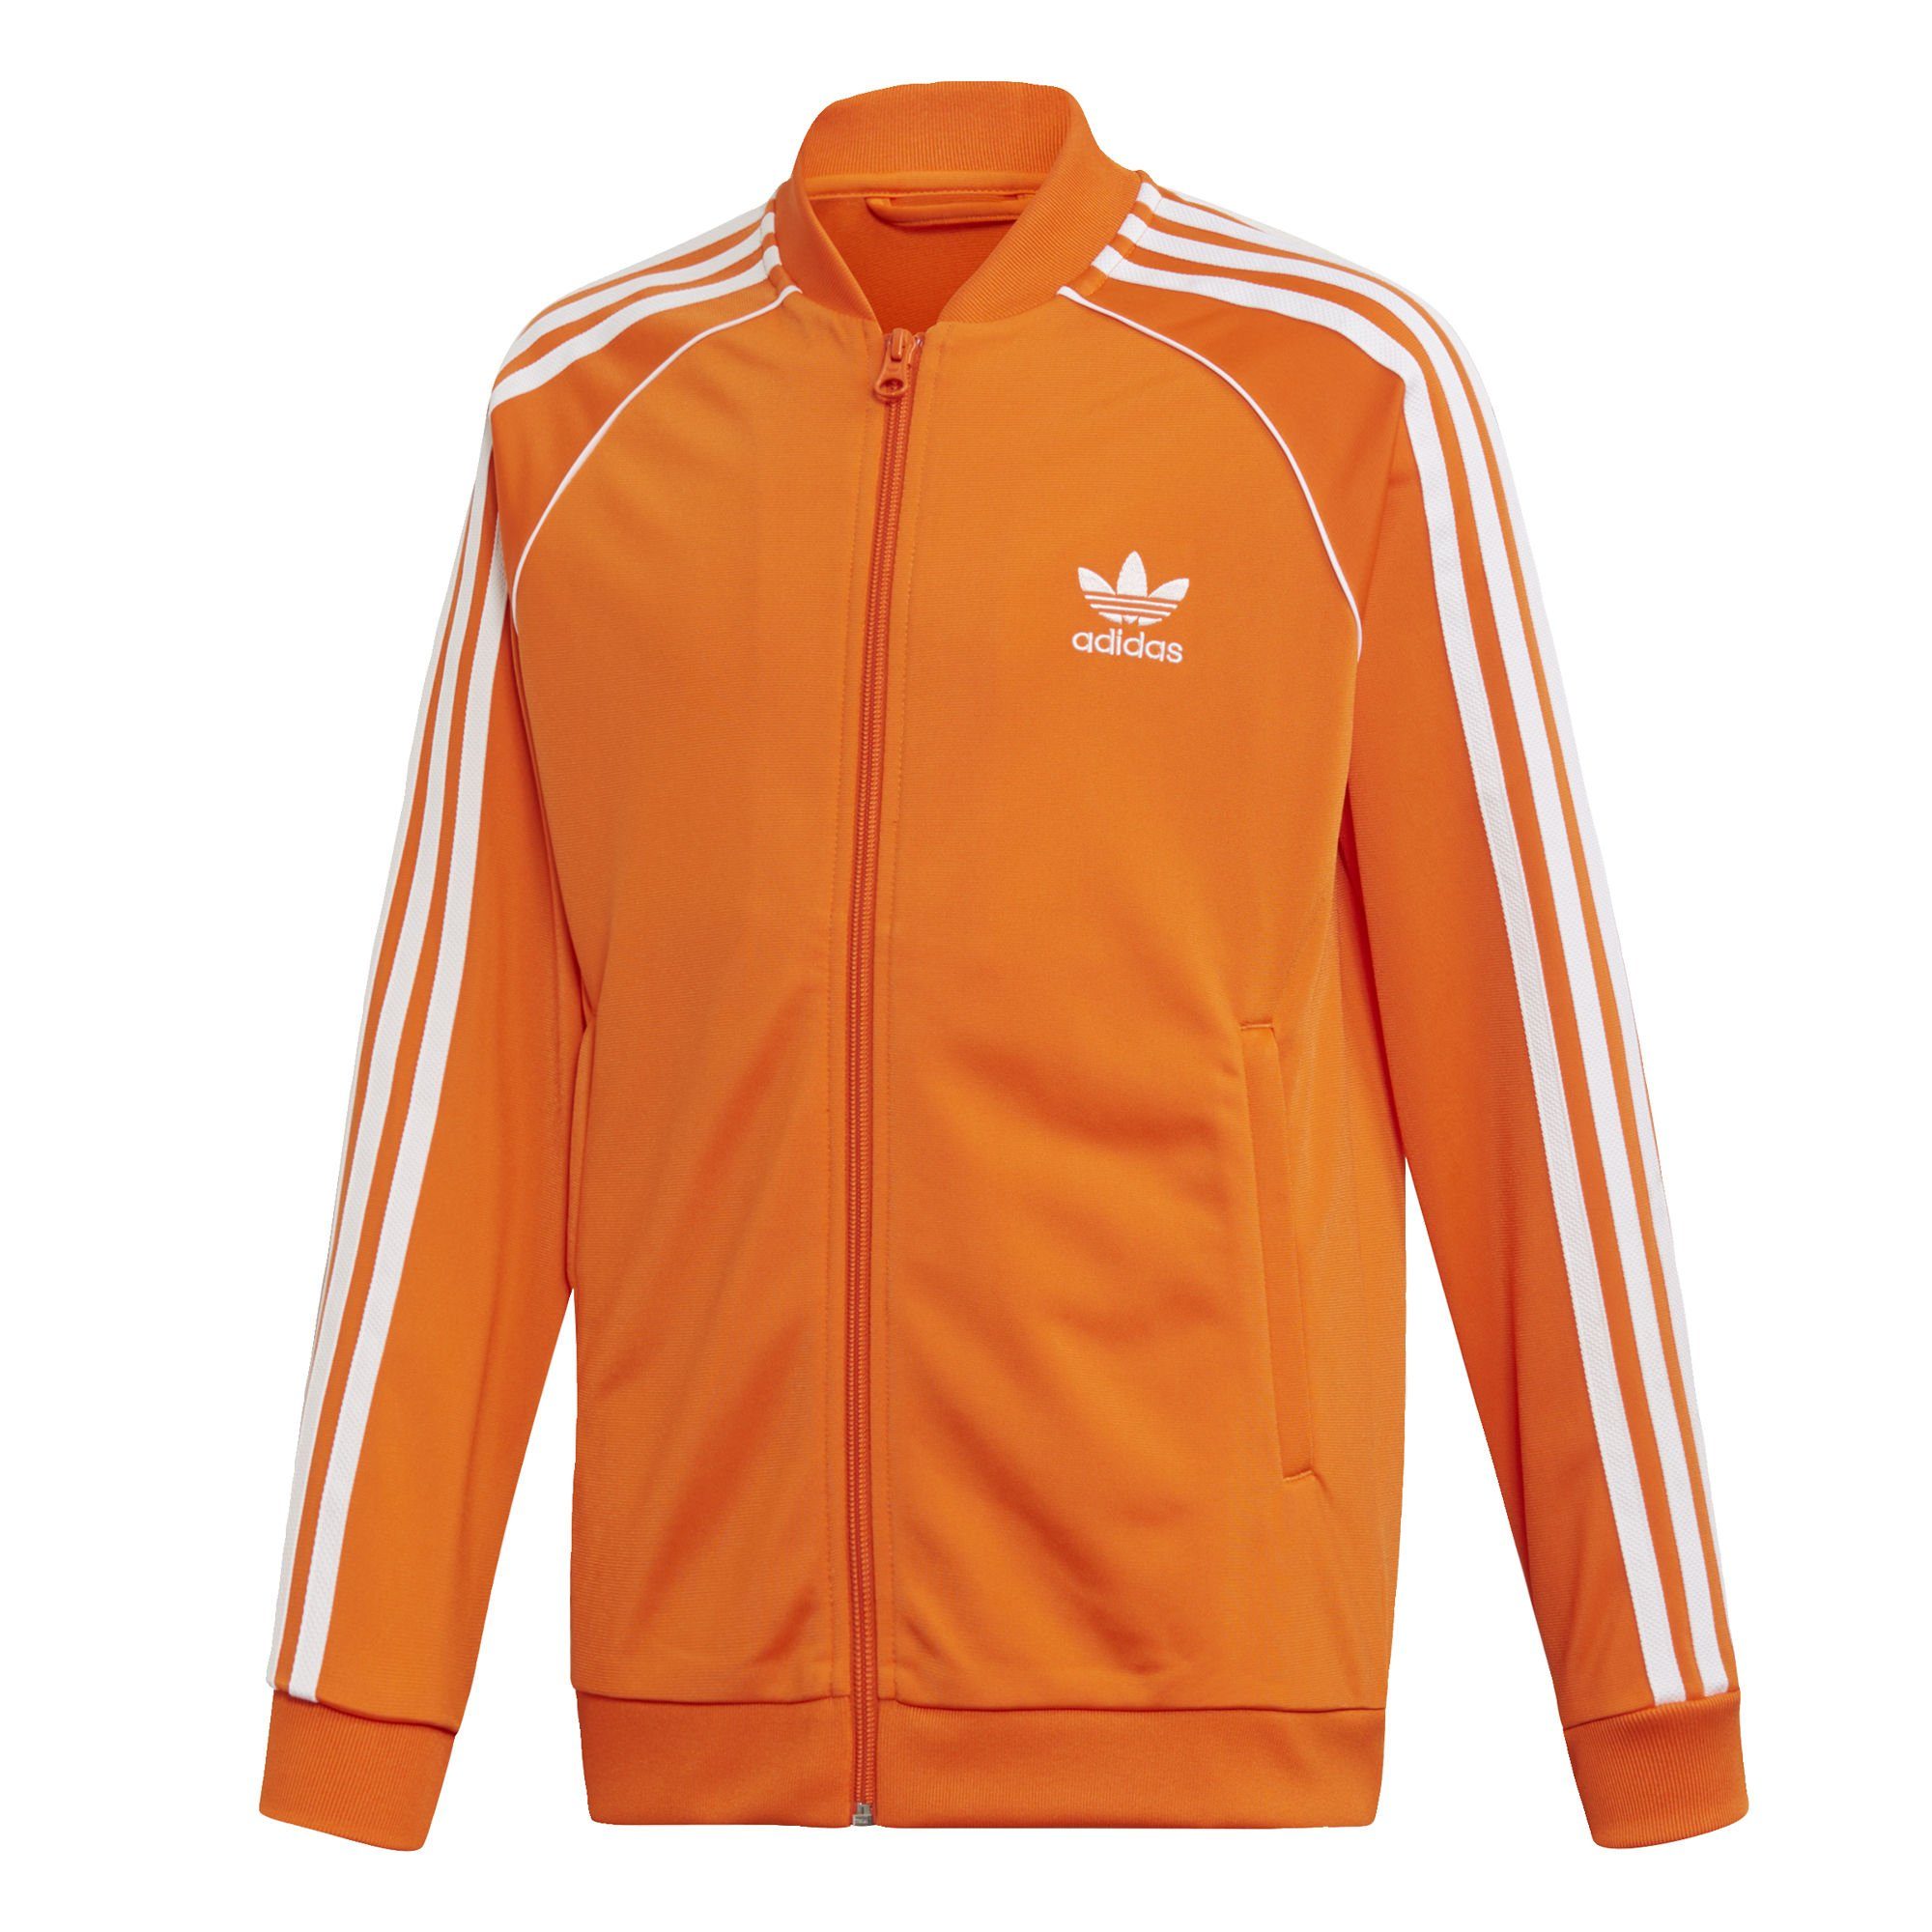 26+  Fakten über  Adidas Jacke Orange: The perfect layer for players, professionals and weekend warriors, adidas makes modern women’s jackets for every setting.